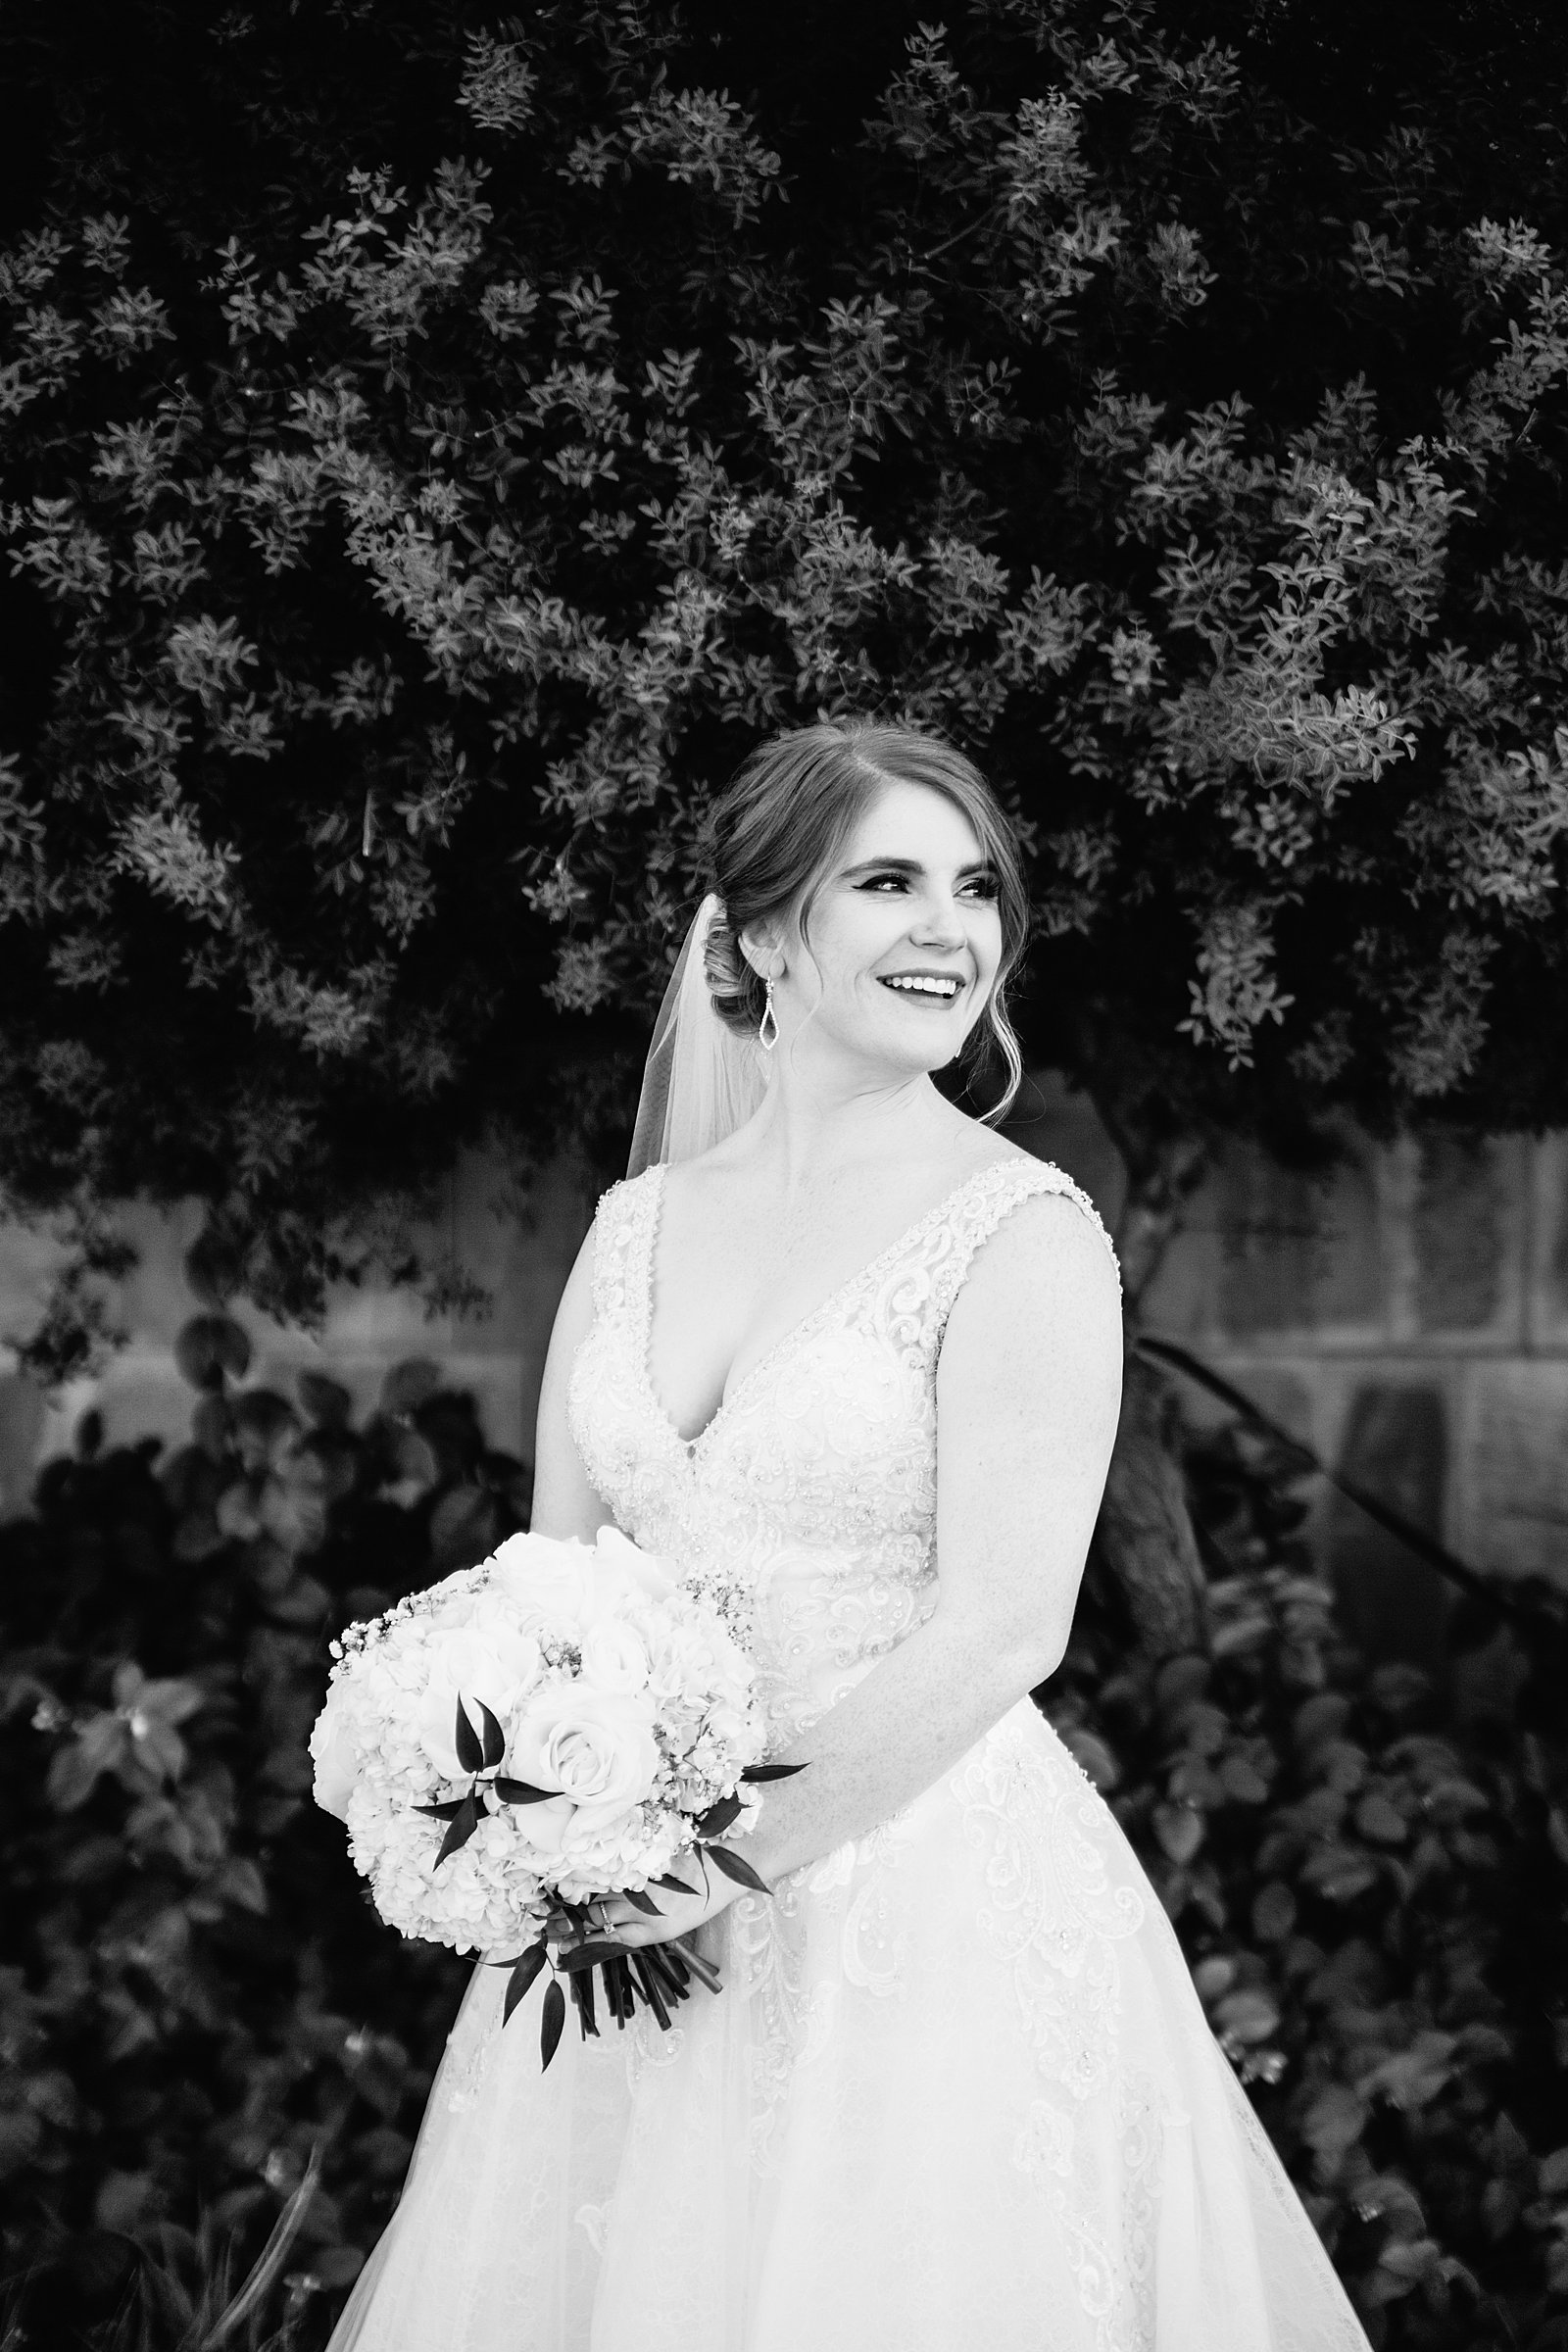 Bride laughing on her wedding day by Phoenix wedding photographer PMA Photography.